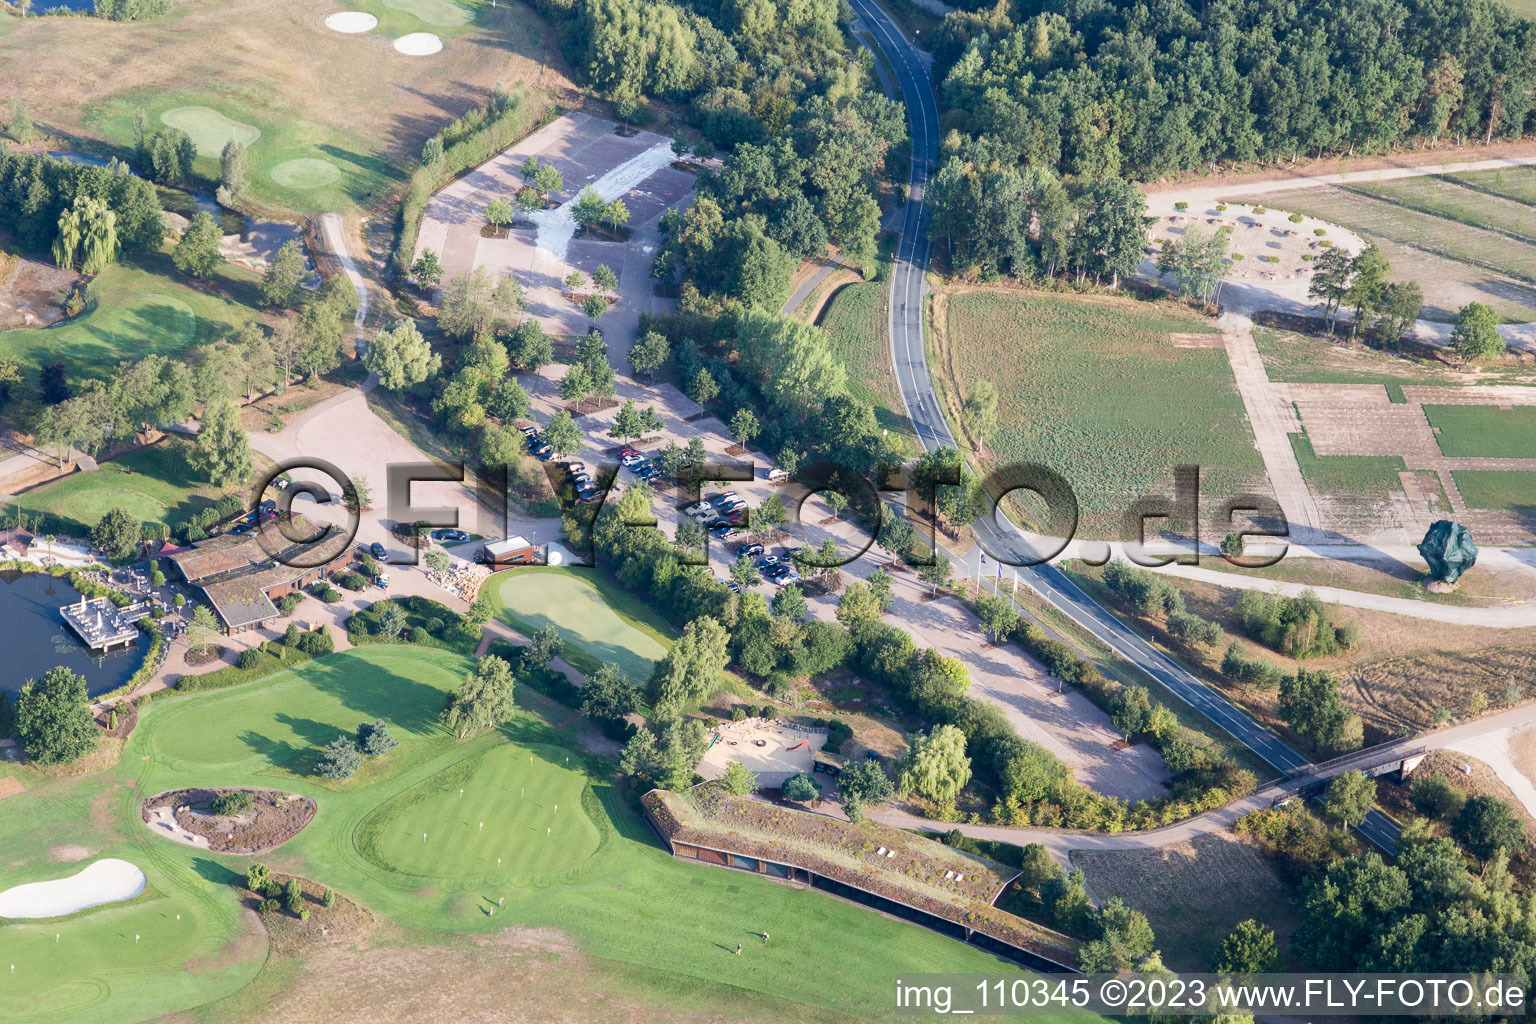 Aerial view of Grounds of the Golf course at Green Eagle Golf Courses in Winsen (Luhe) in the state Lower Saxony, Germany